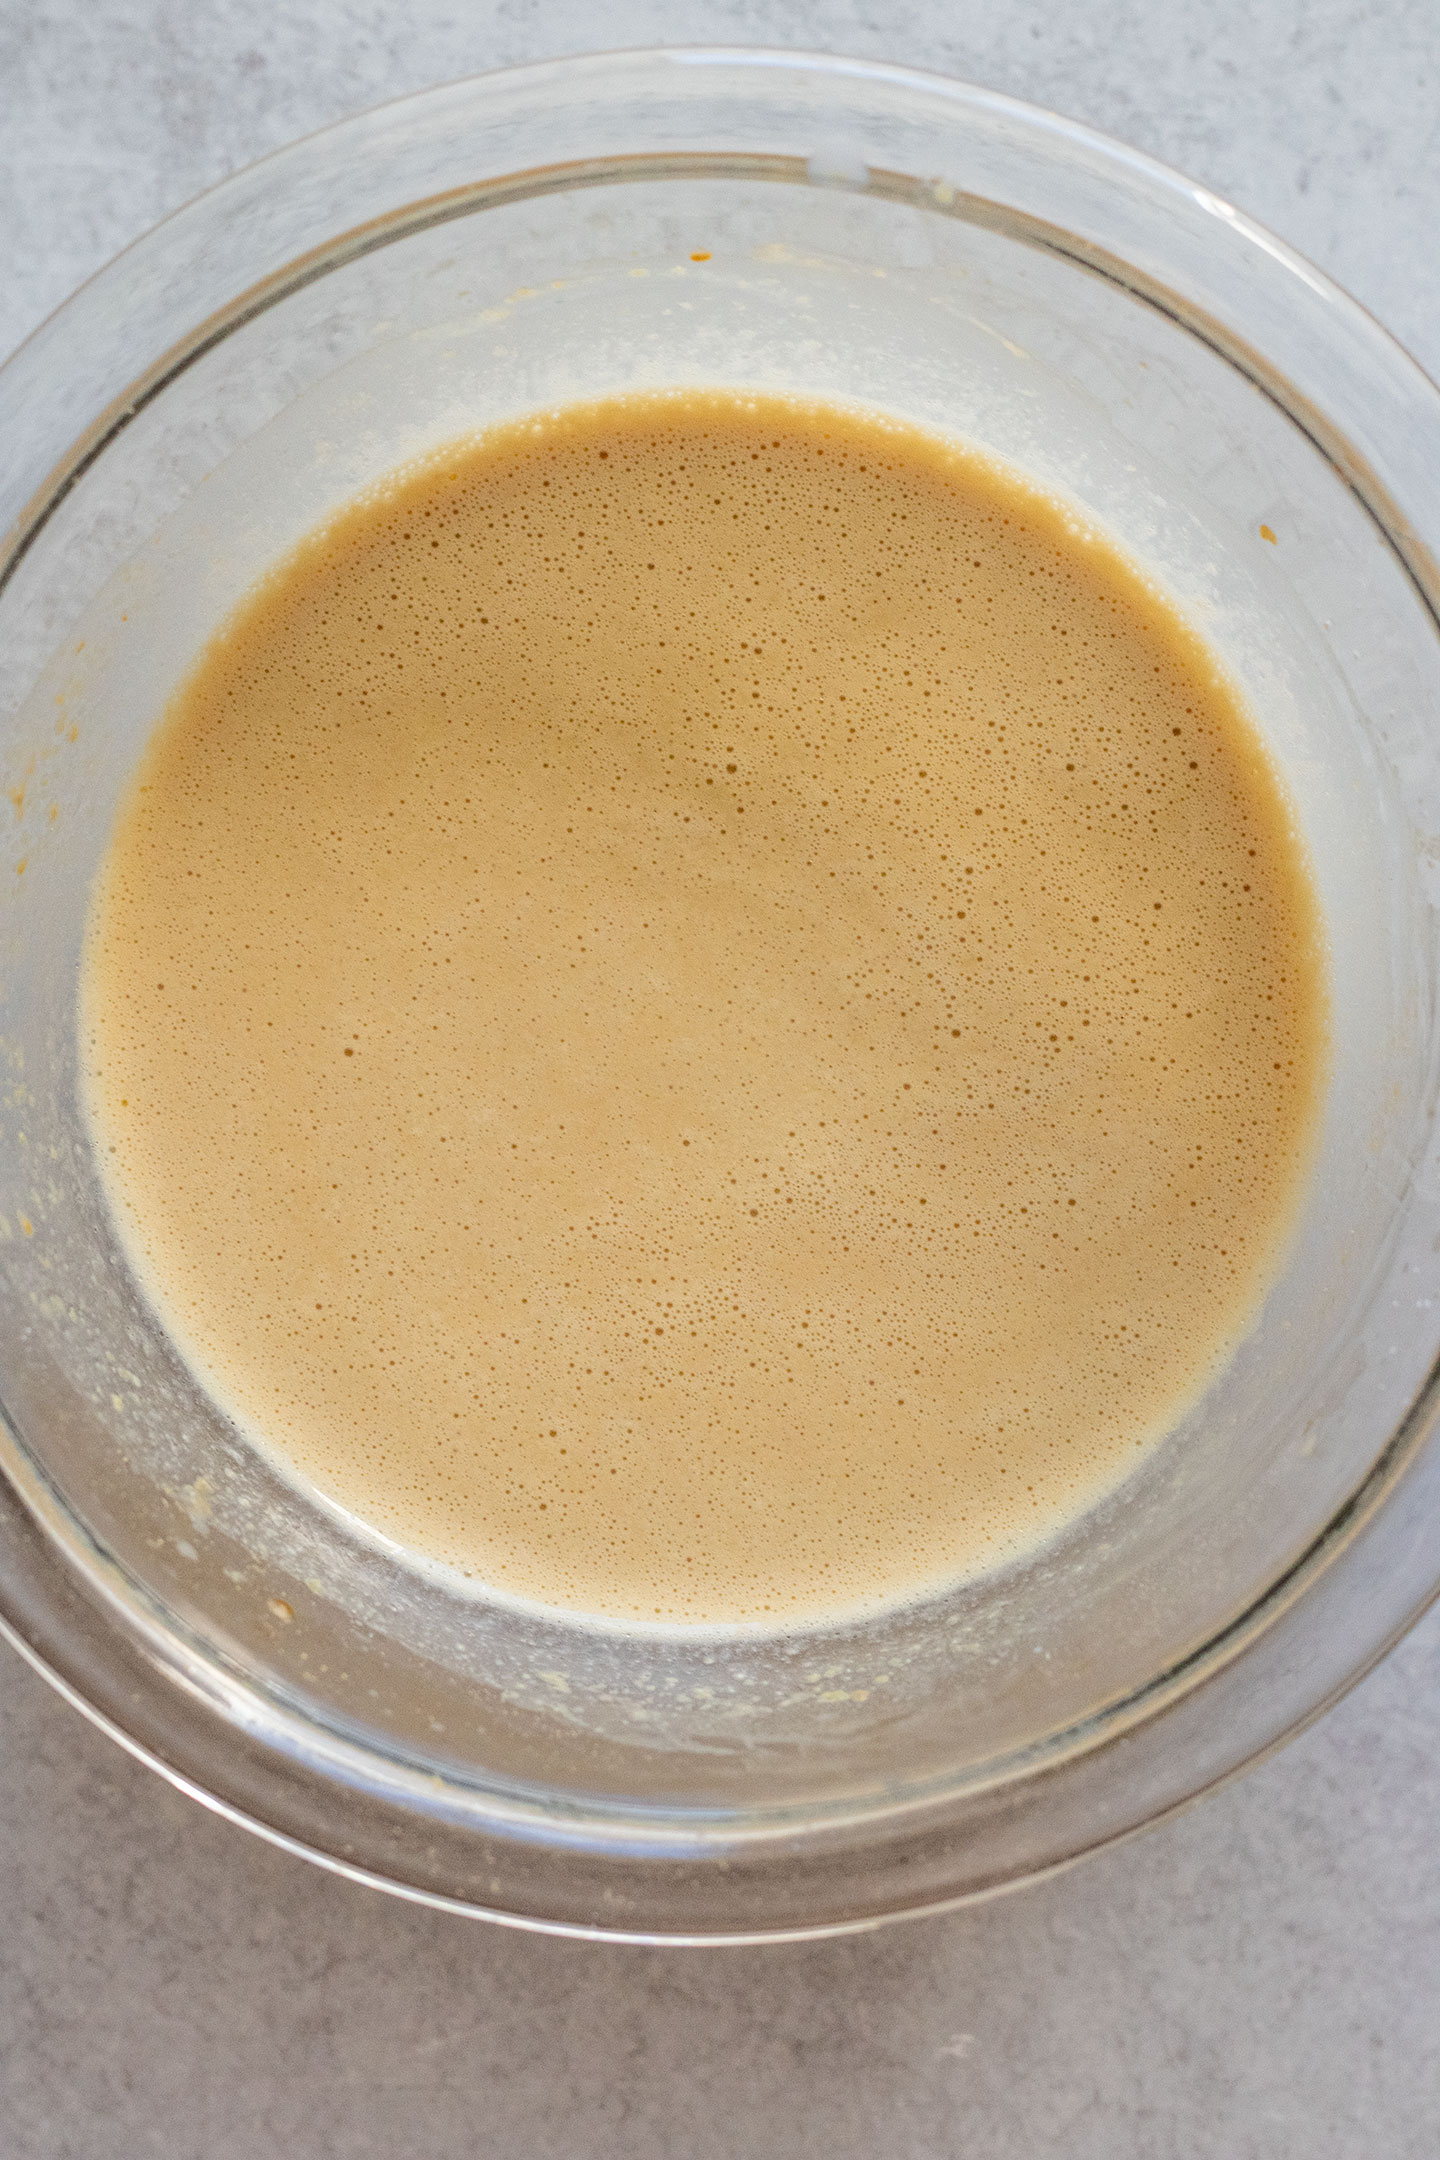 The miso cream sauce blended together.